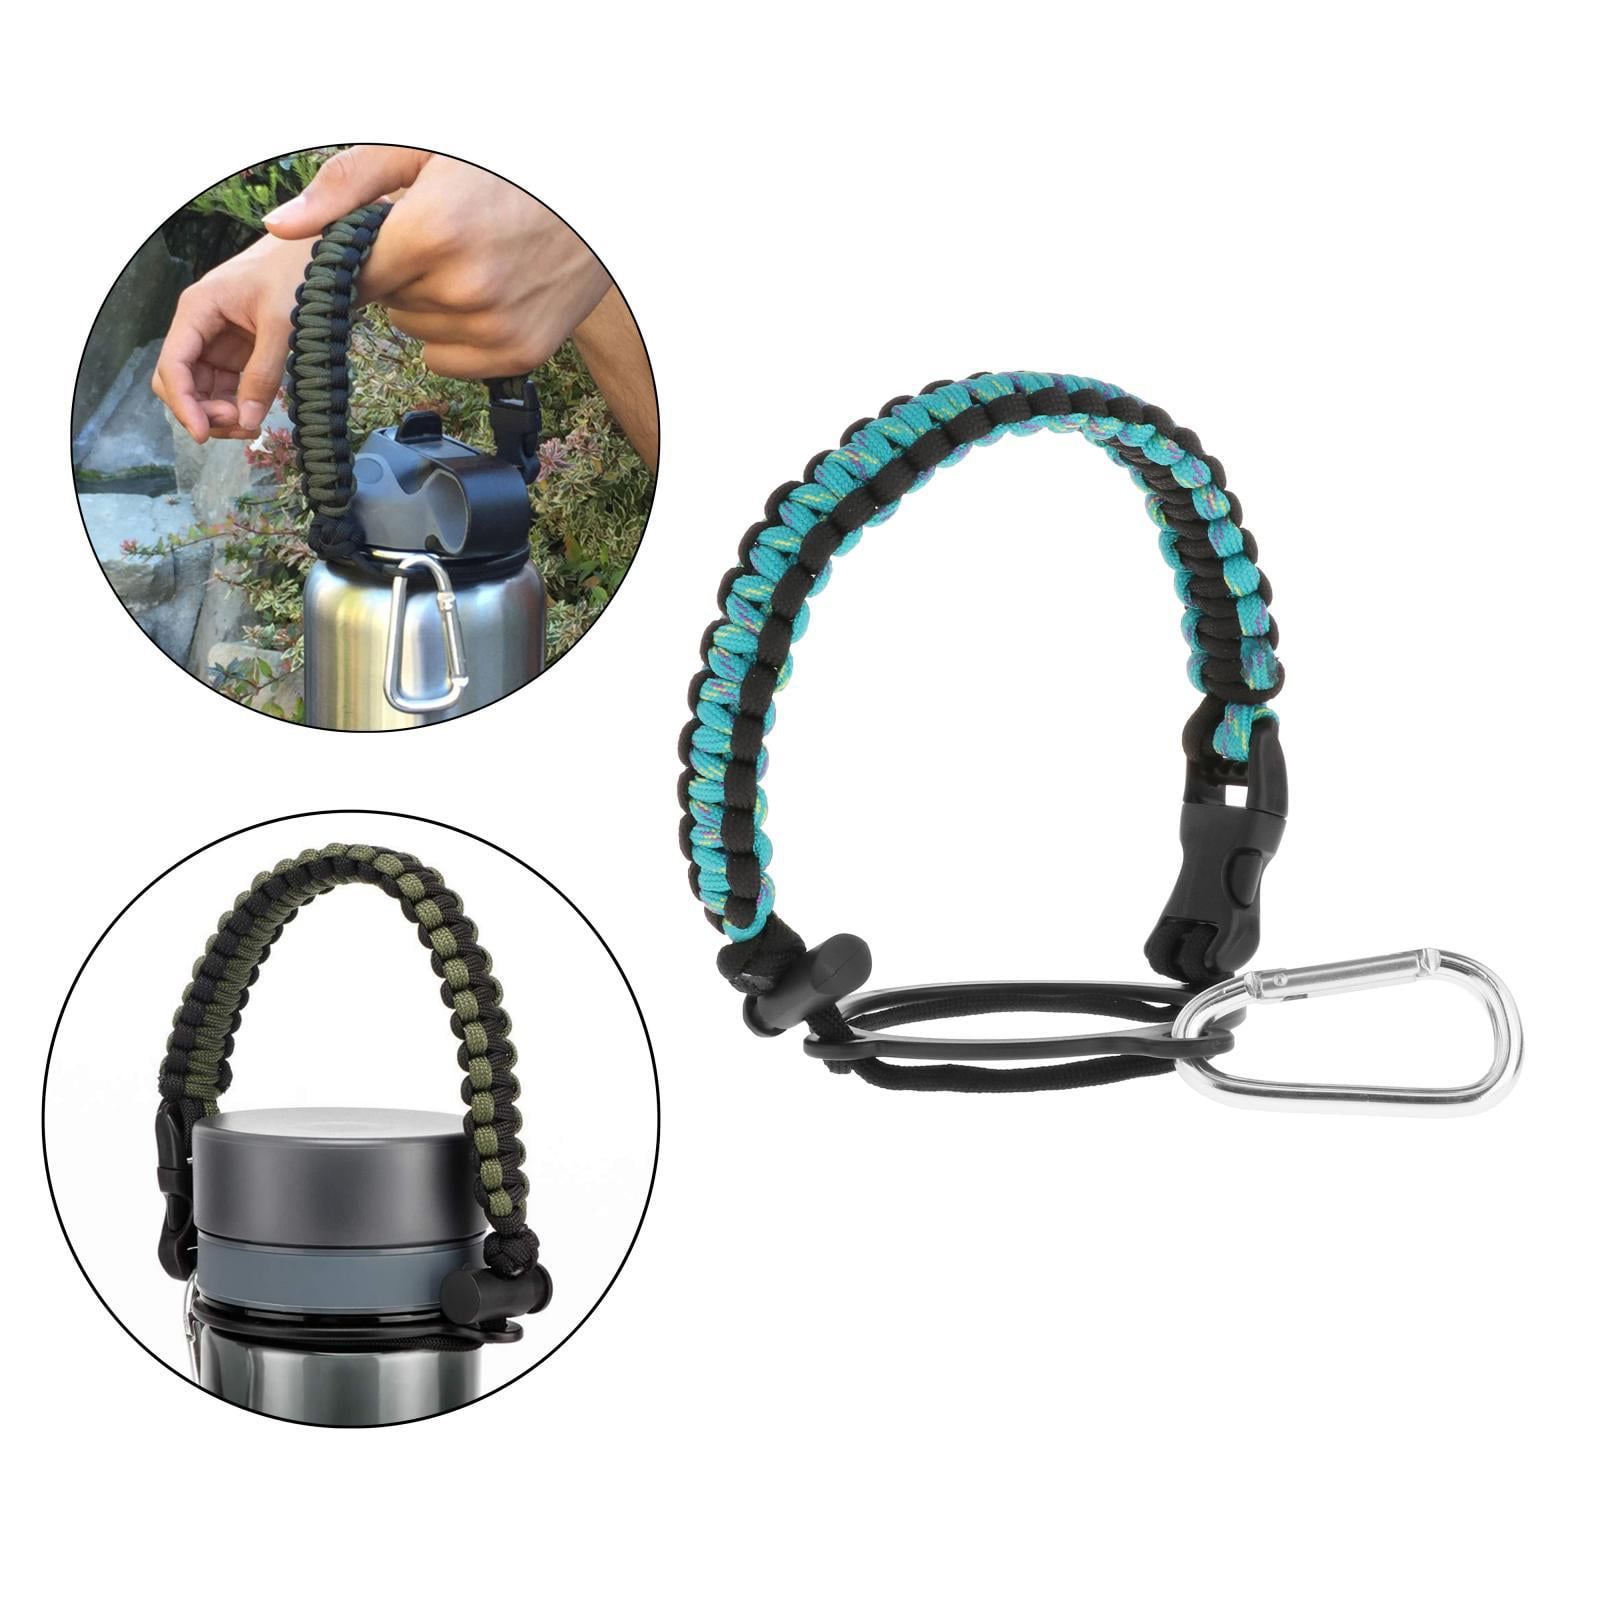 Hydro Flask Portable Paracord Water Bottles Handle Carrier for Hydro Flask1.0 Camping 